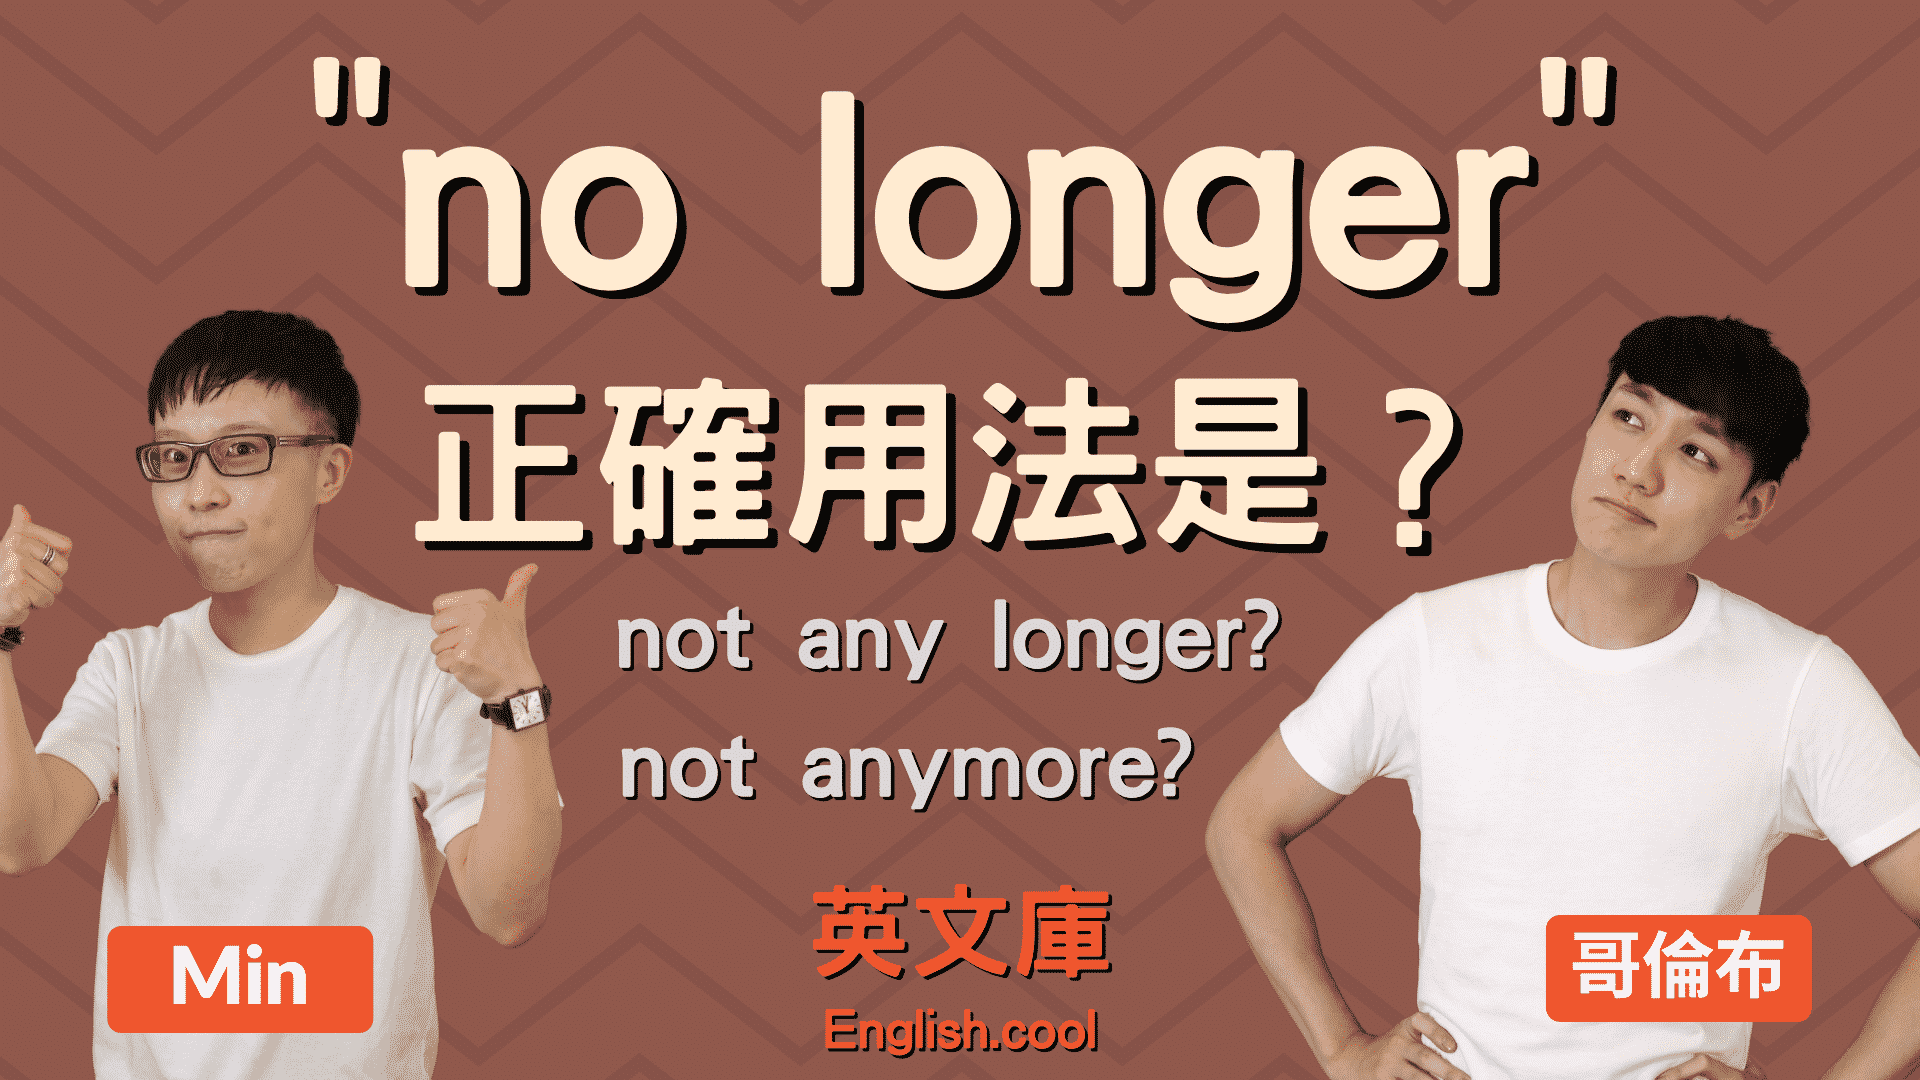 You are currently viewing 「no longer」正確用法是？看例句一次搞懂！